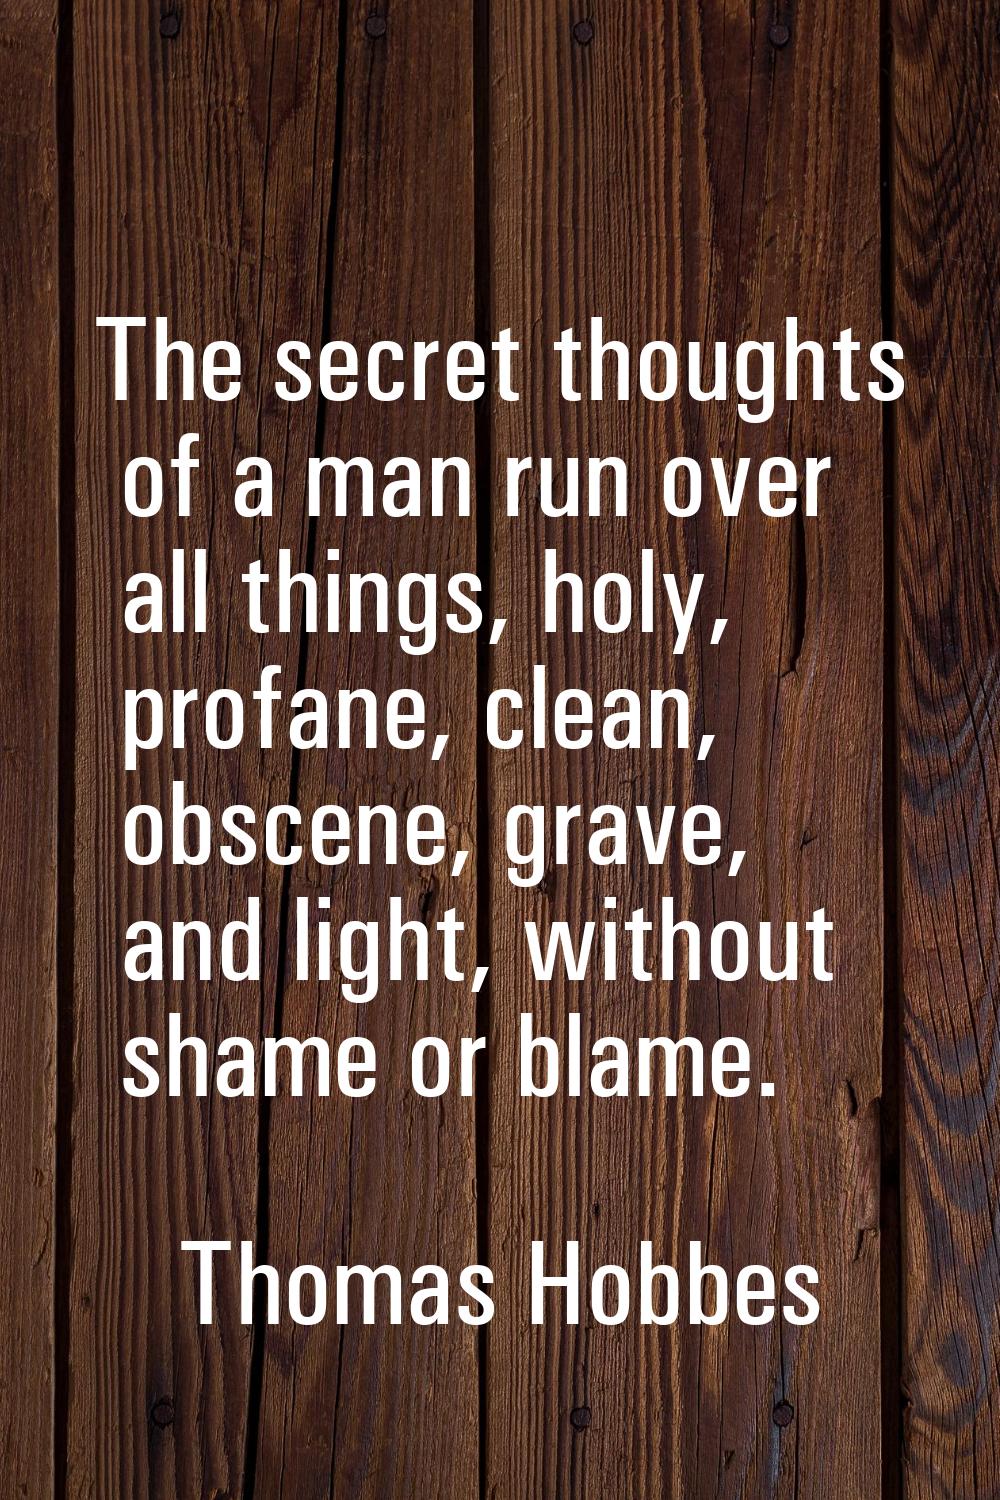 The secret thoughts of a man run over all things, holy, profane, clean, obscene, grave, and light, 